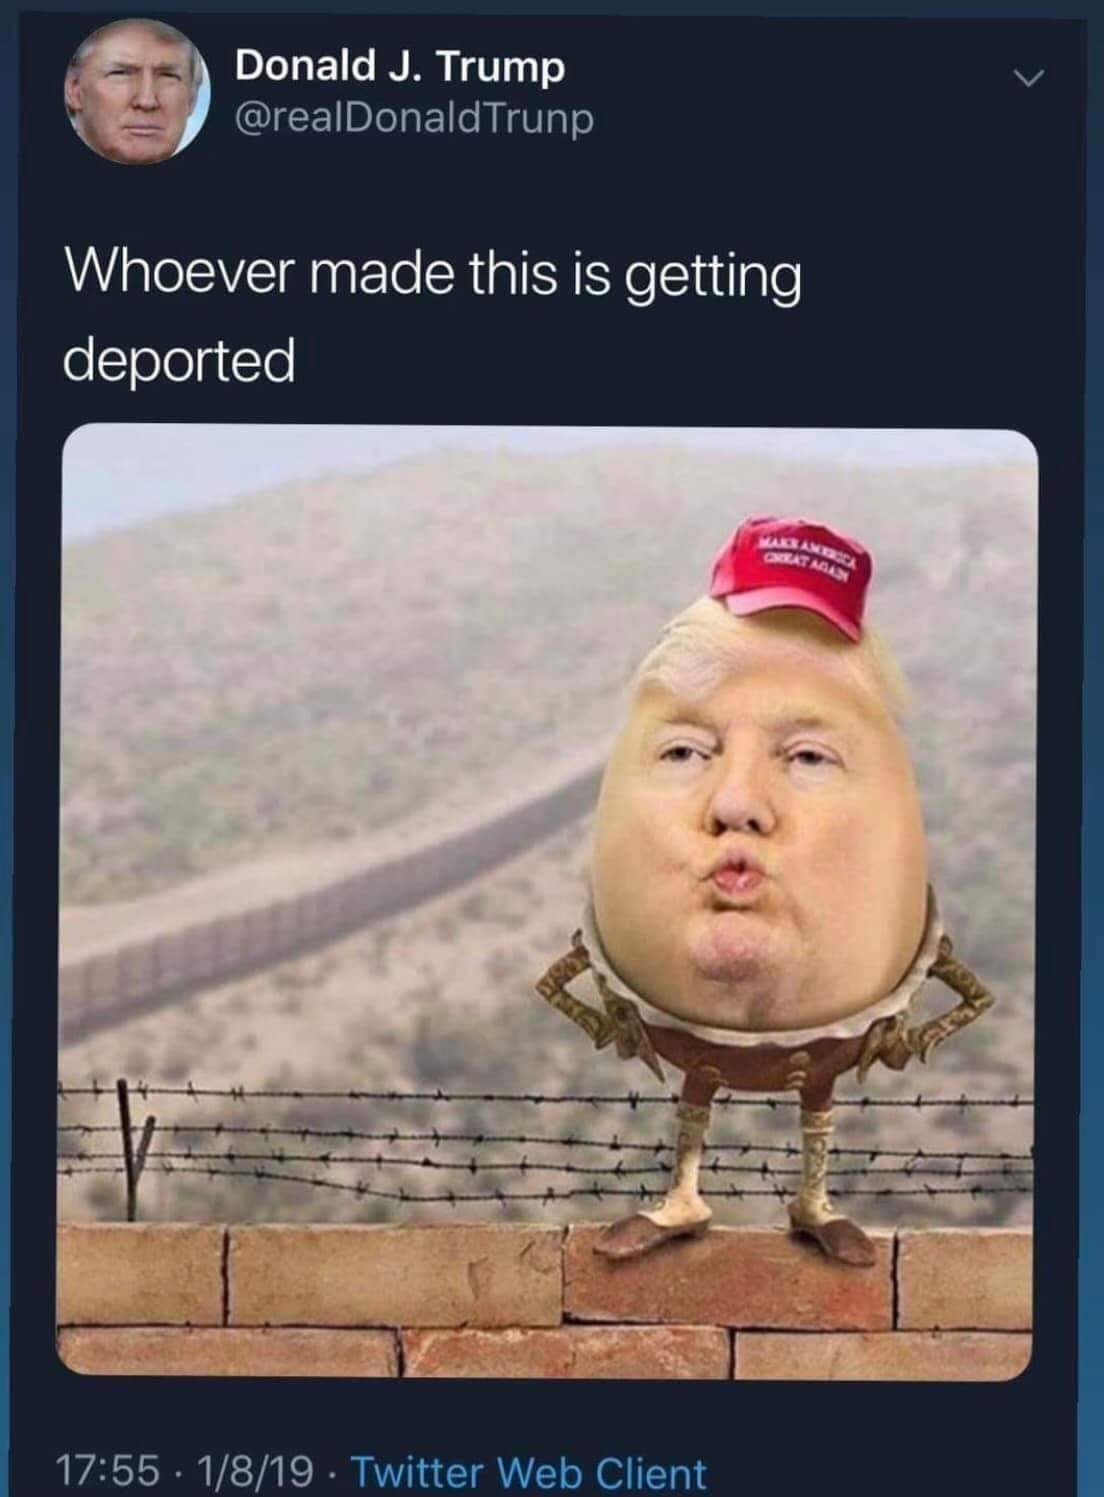 donald trump humpty dumpty twitter - Donald J. Trump Trunp Whoever made this is getting deported 1819 . Twitter Web Client